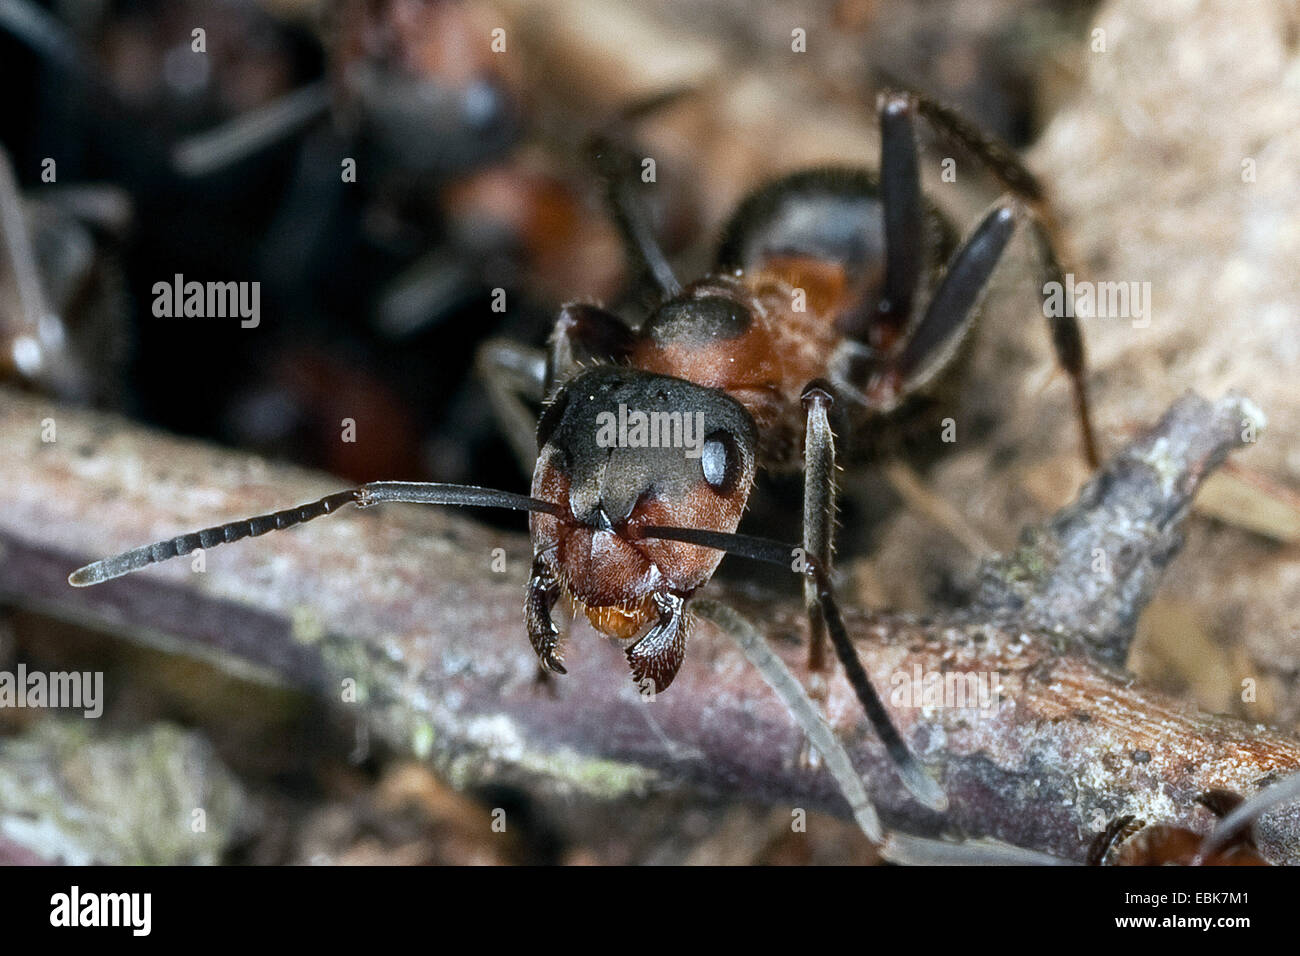 European Red Wood Ant (Formica pratensis), portrait, Germany Stock Photo